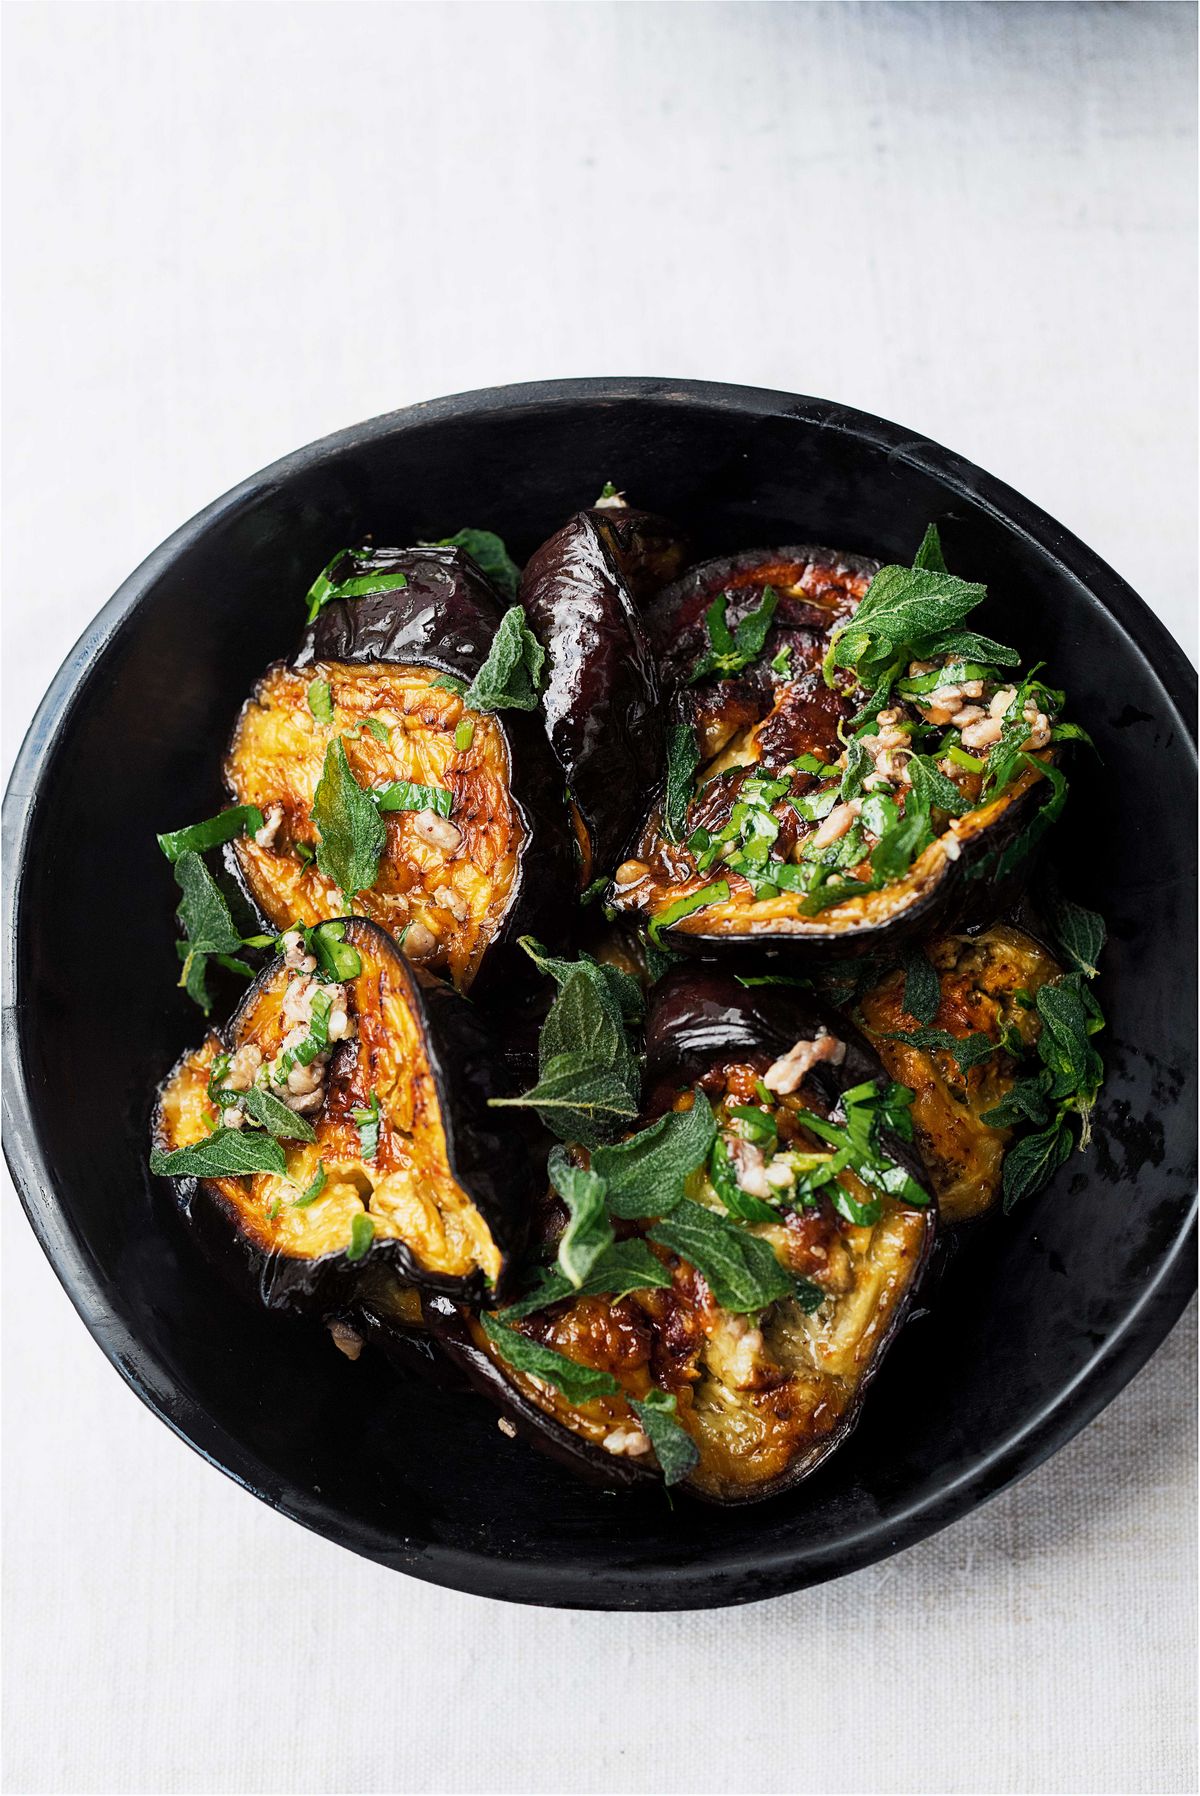 Yotam Ottolenghi’s Roasted Aubergine with Anchovies and Oregano